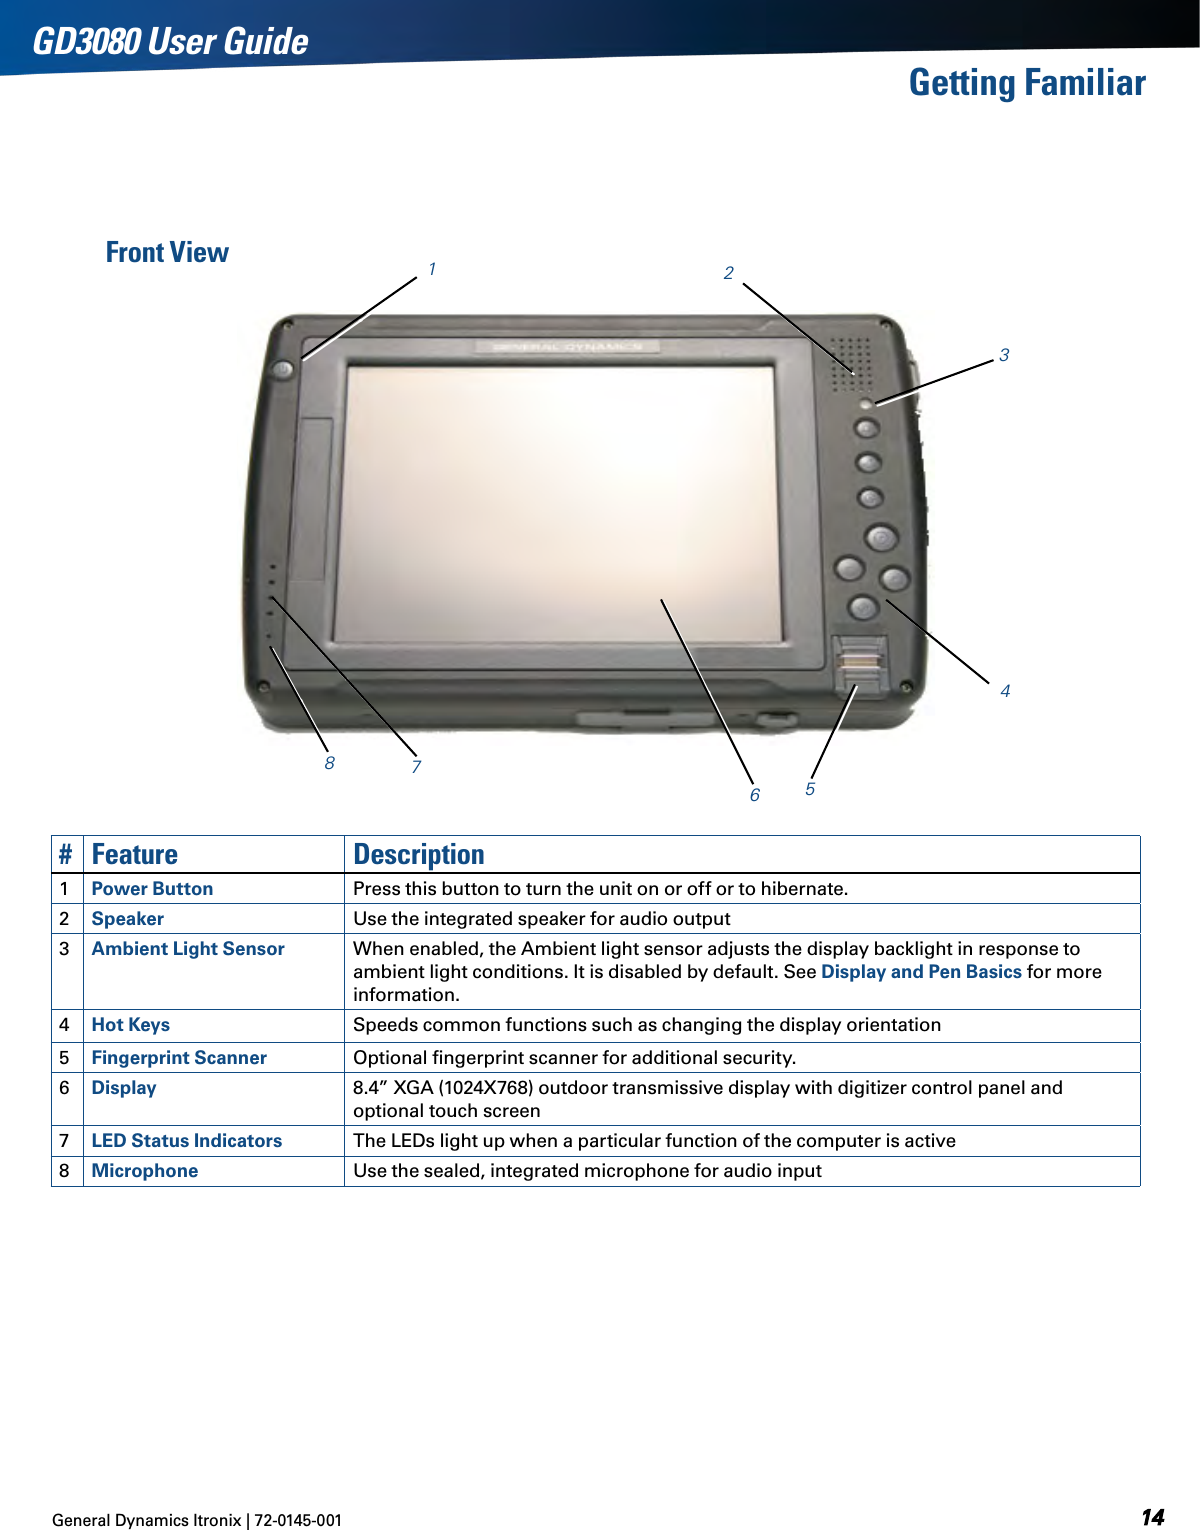 General Dynamics Itronix | 72-0145-001GD3080 User GuideFront View 12345768#Feature Description1Power Button Press this button to turn the unit on or off or to hibernate.2Speaker Use the integrated speaker for audio output3Ambient Light Sensor When enabled, the Ambient light sensor adjusts the display backlight in response to ambient light conditions. It is disabled by default. See Display and Pen Basics for more information.4Hot Keys Speeds common functions such as changing the display orientation5Fingerprint Scanner Optional ﬁngerprint scanner for additional security.6Display 8.4” XGA (1024X768) outdoor transmissive display with digitizer control panel and optional touch screen7LED Status Indicators The LEDs light up when a particular function of the computer is active8Microphone Use the sealed, integrated microphone for audio inputGetting Familiar